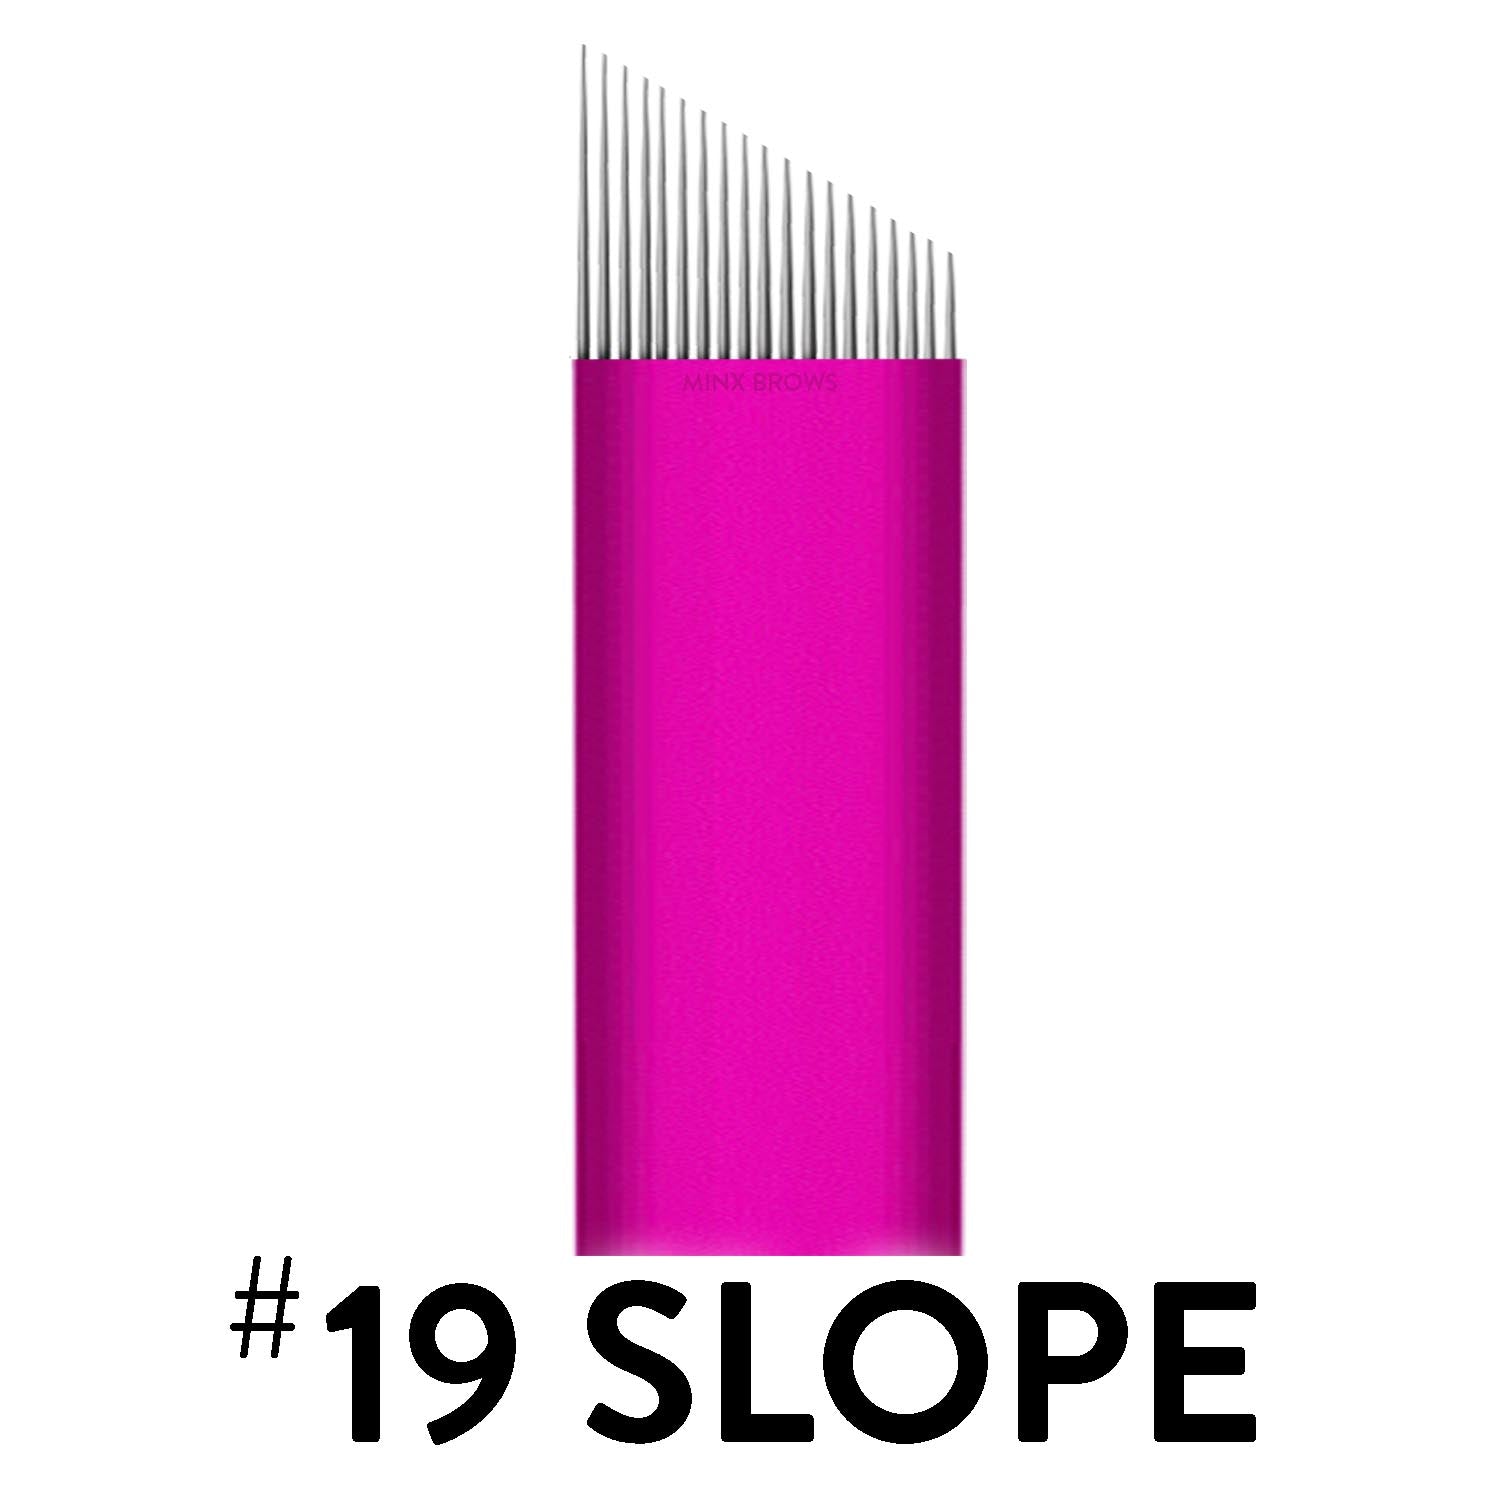 $1.25 Pink Collection Microblade - 19 Slope